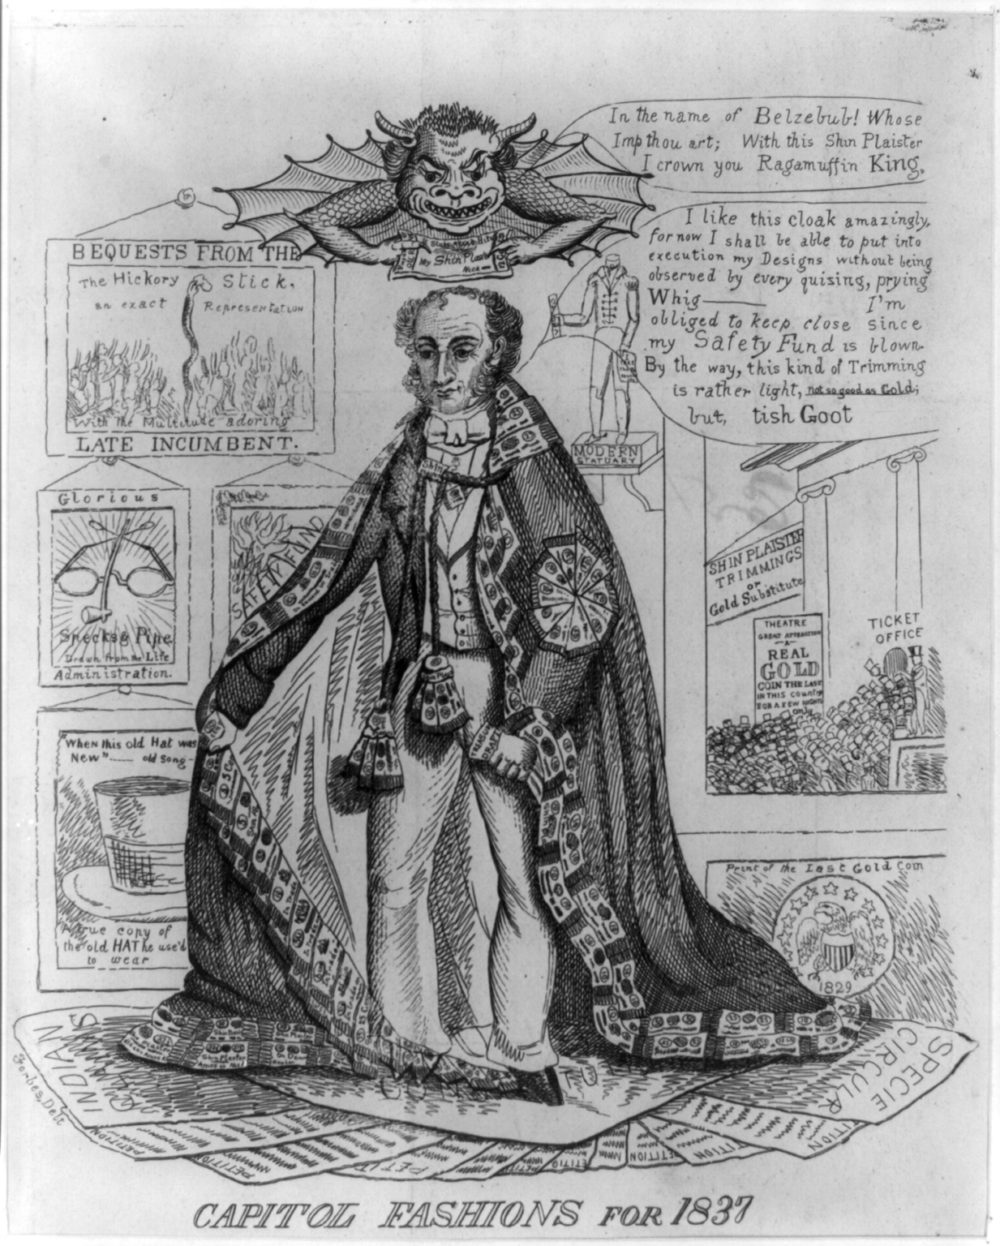 Winston, F. J. “Capitol Fashions for 1837,” 1837, via Library of Congress